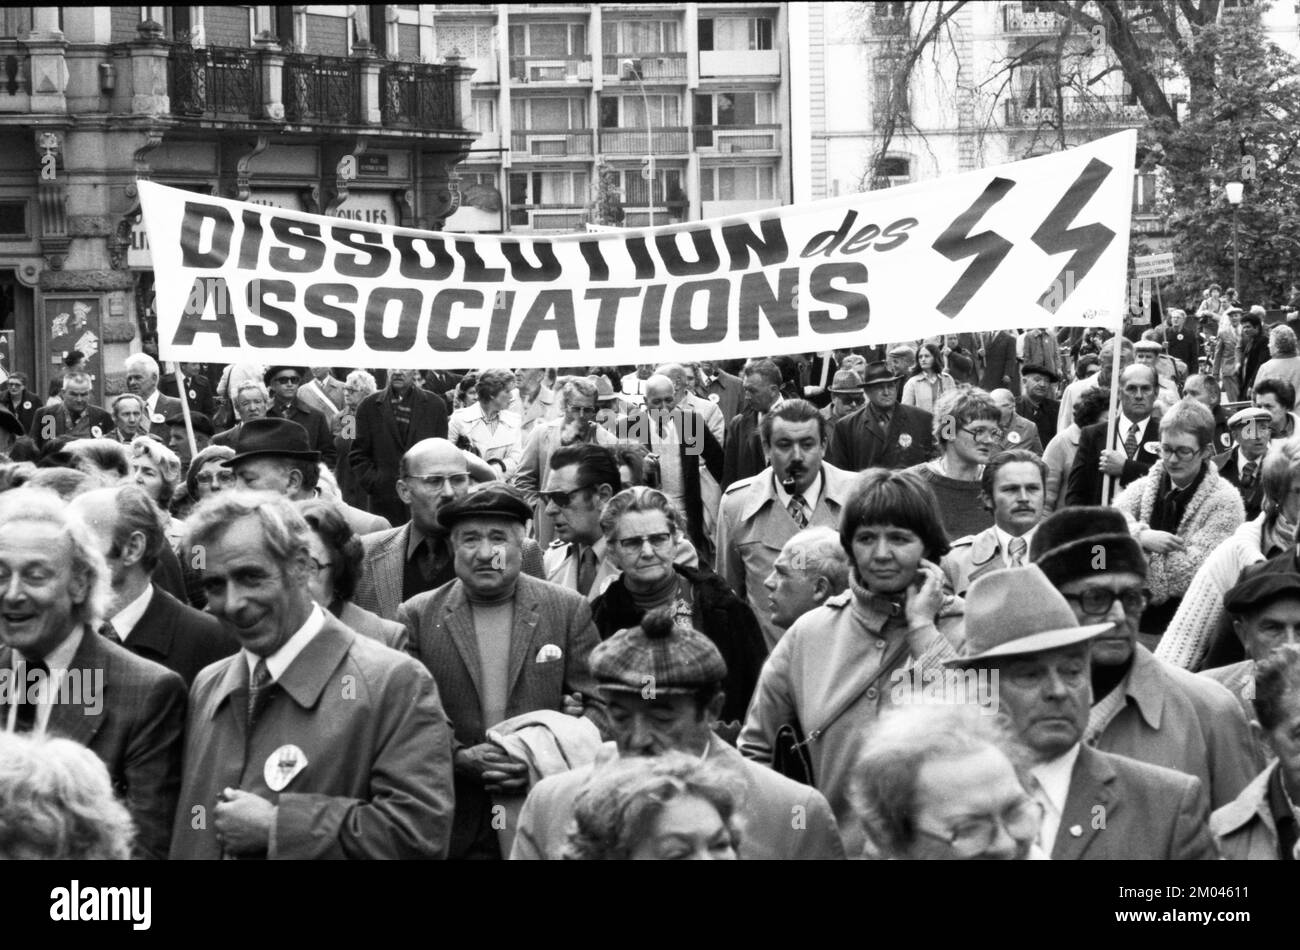 International resistance fighters and persecutees of the Nazi regime demonstrated against the prosecution of Nazi crimes, partly dressed in the clothe Stock Photo